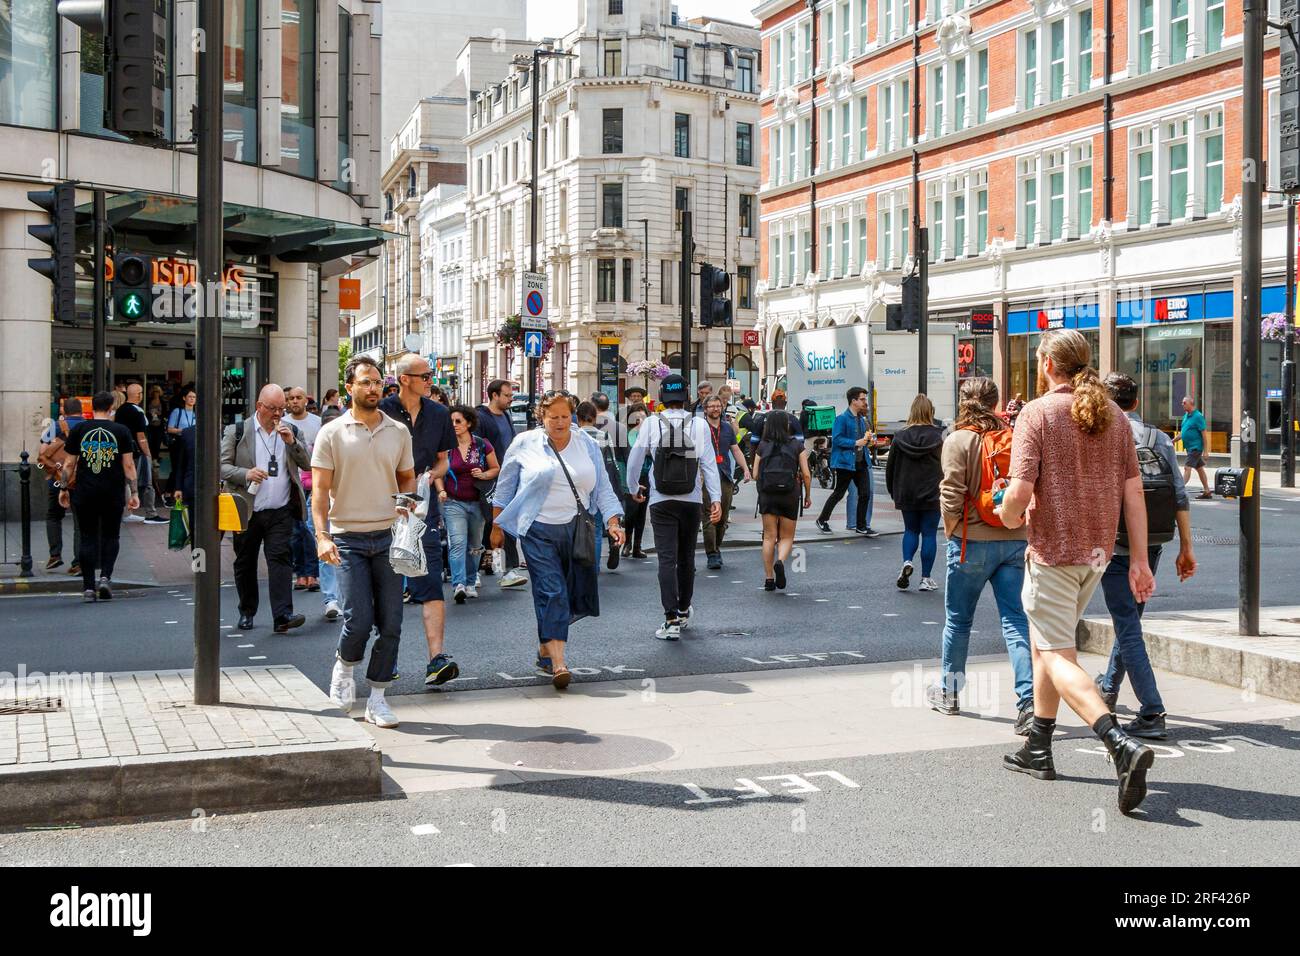 Pedestrians crossing at the intersection of High Holborn and Southampton Row in Central London, UK Stock Photo